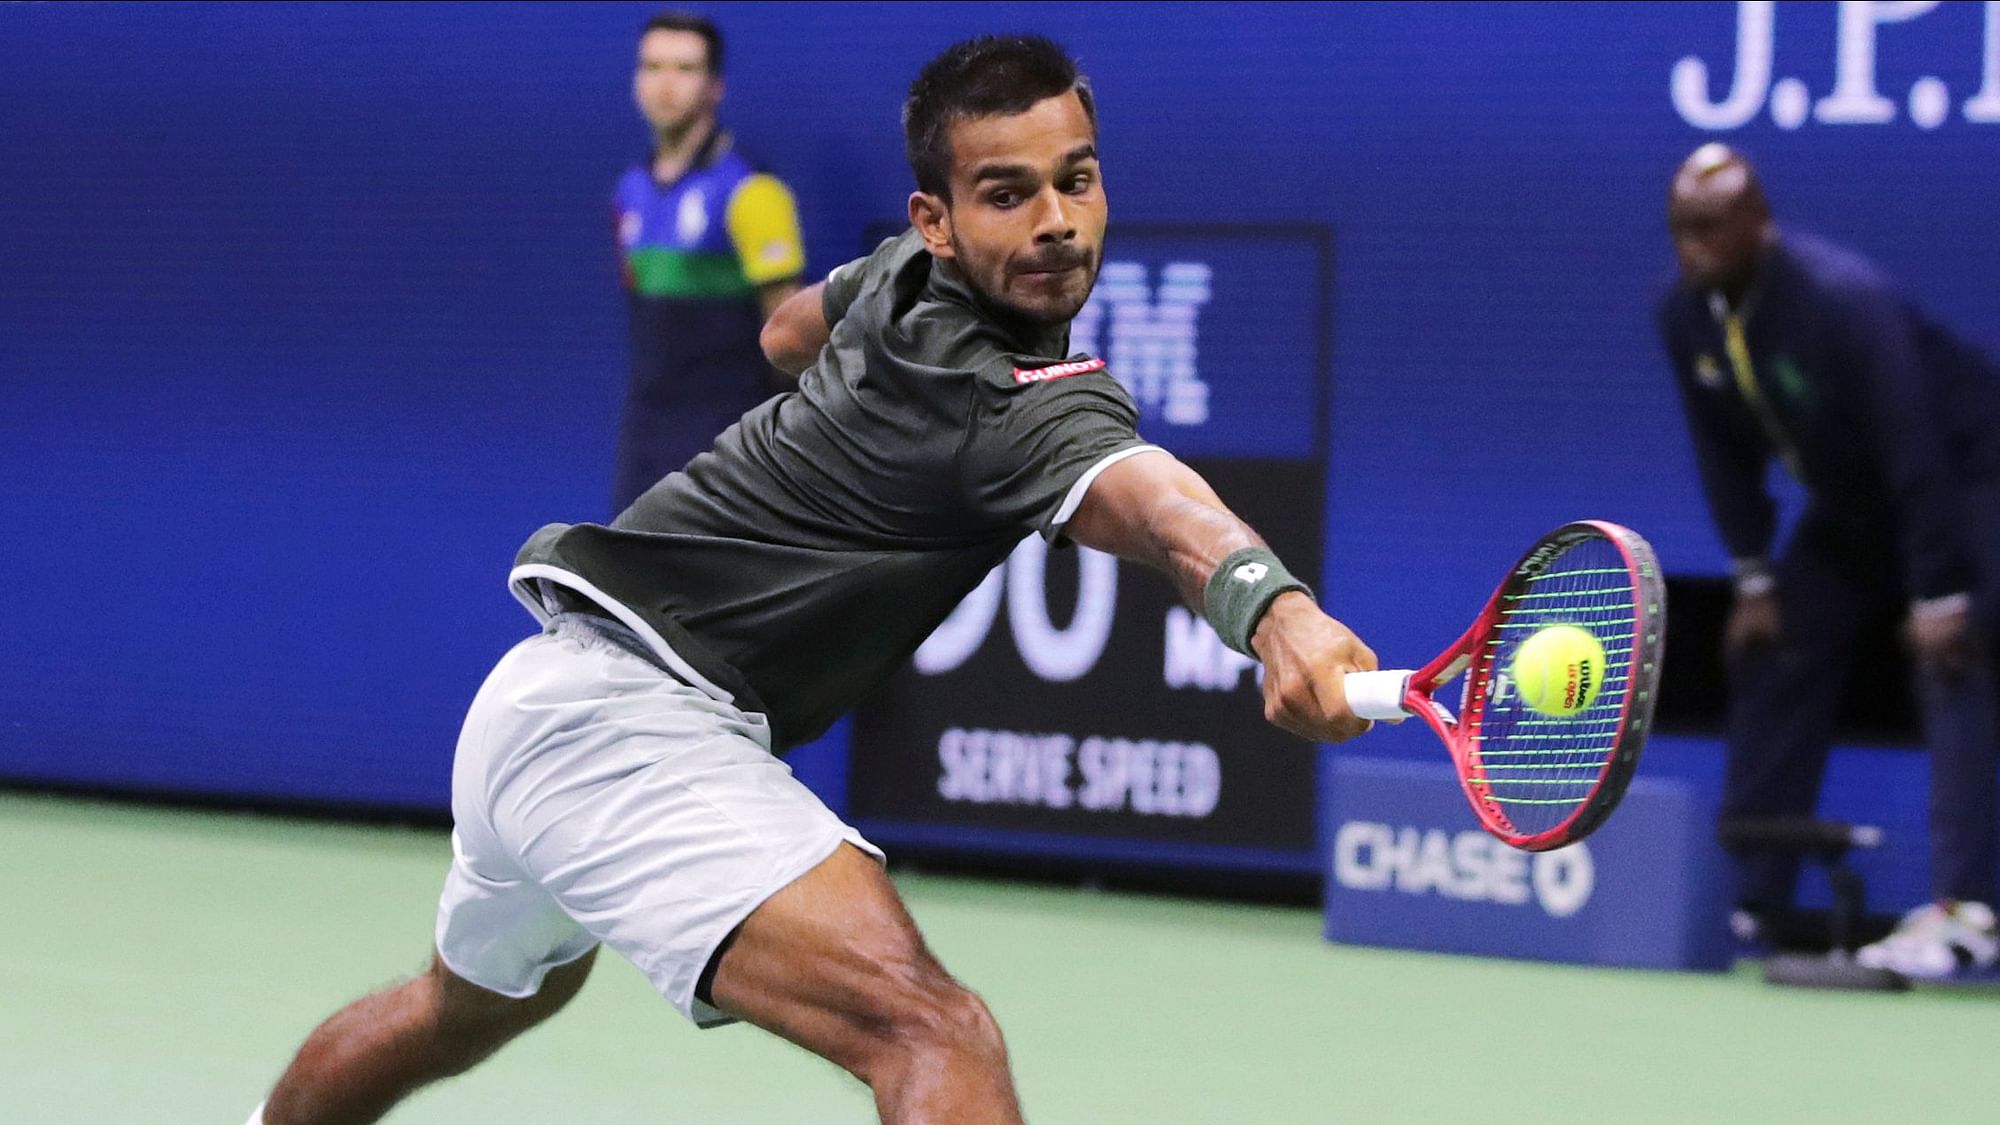 Sumit Nagal earned his first-ever Davis Cup win, beating Hufaiza Mohammed Rehman 6-0 6-2 in the second singles 